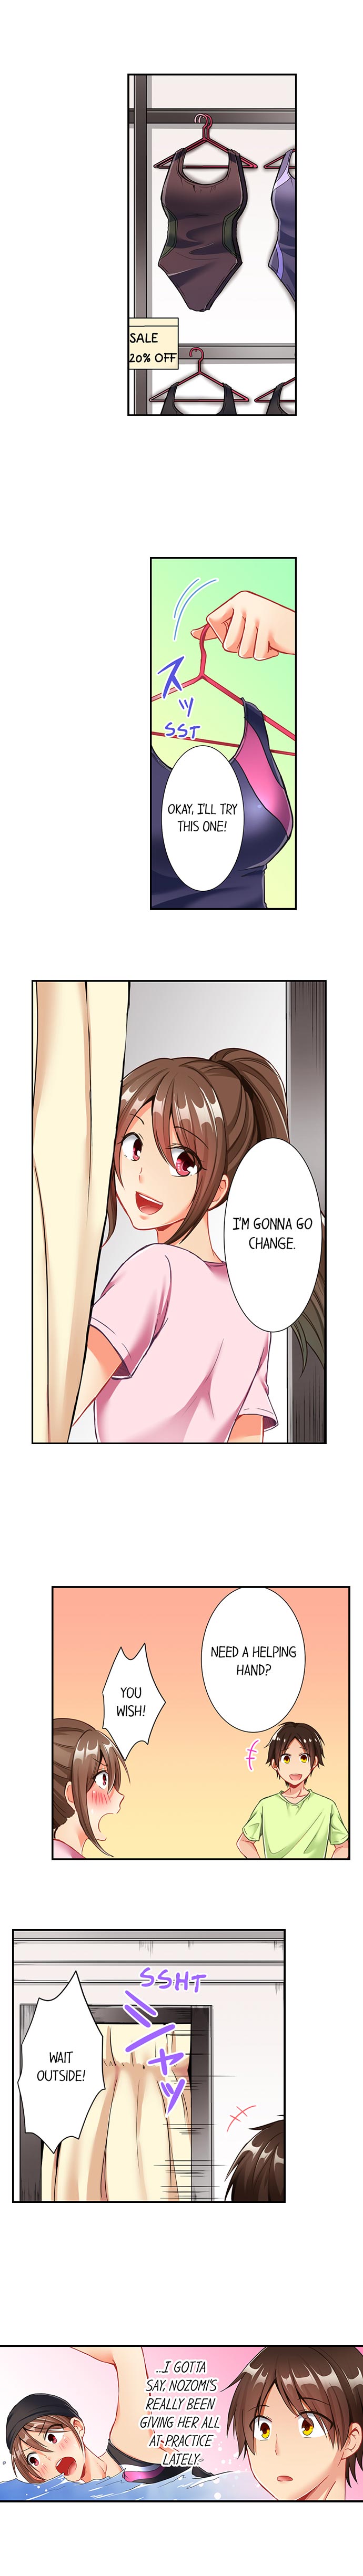 80% of the Swimming Club Girls Are Shaved - Chapter 7 Page 4